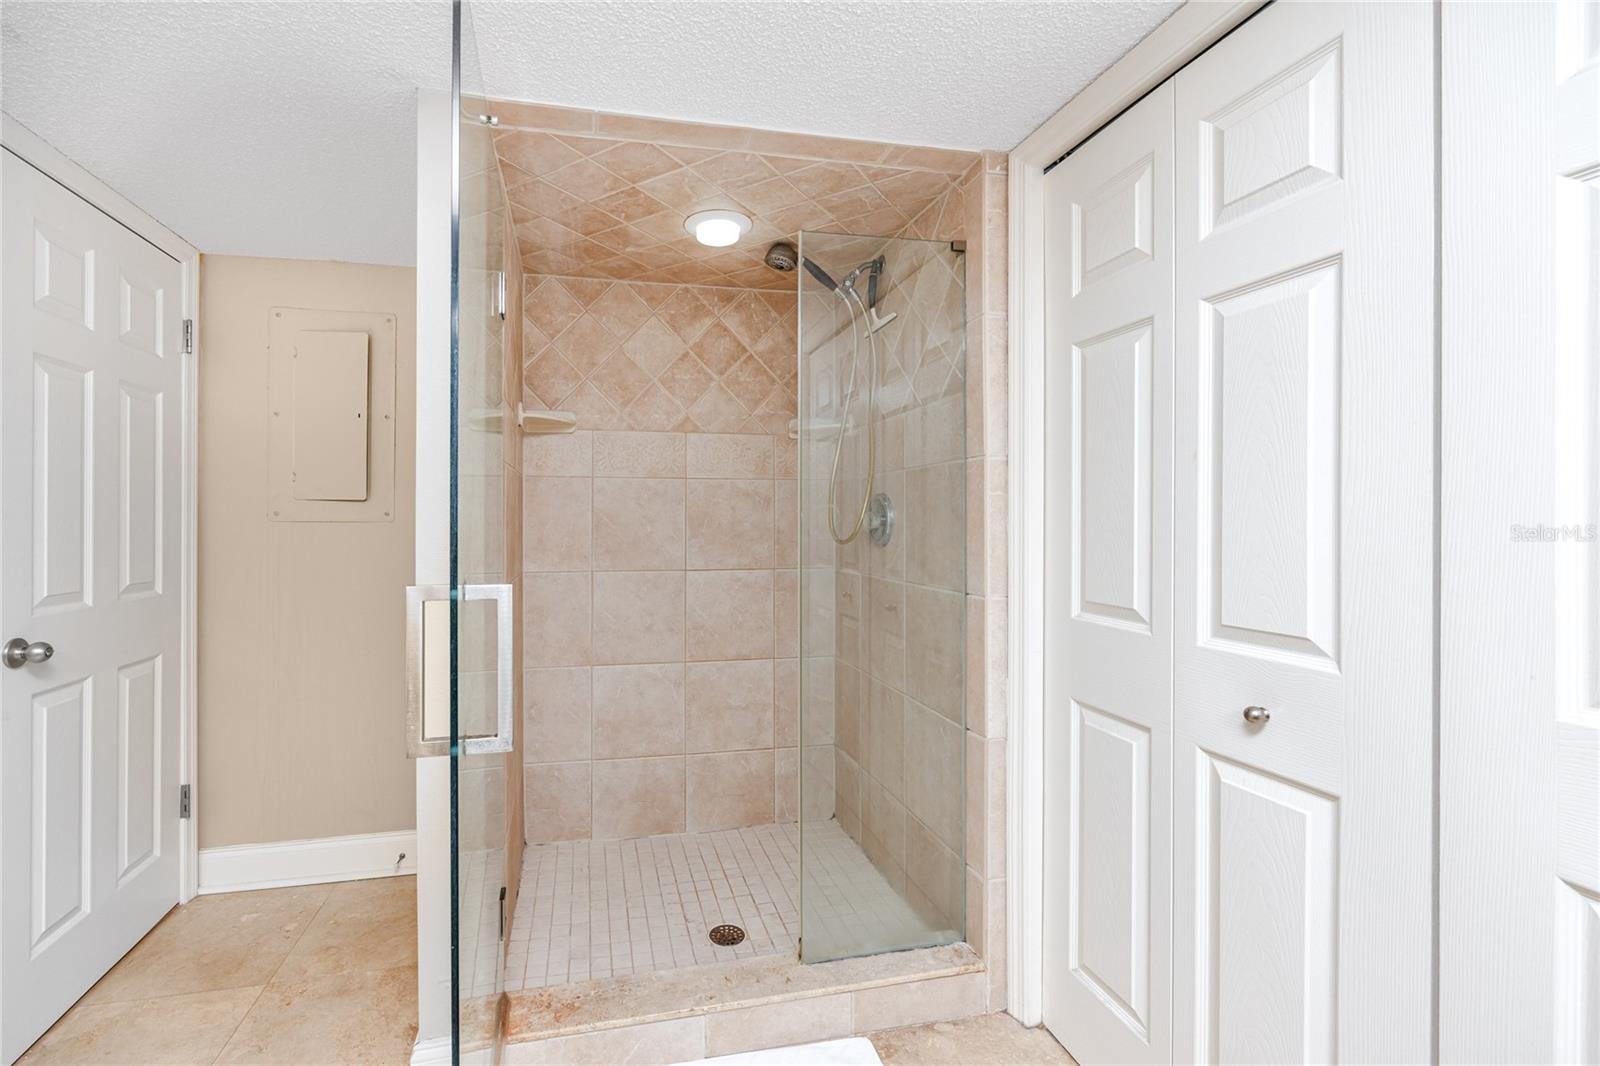 Single vanity with granite countertop and walk in shower with frameless glass doors